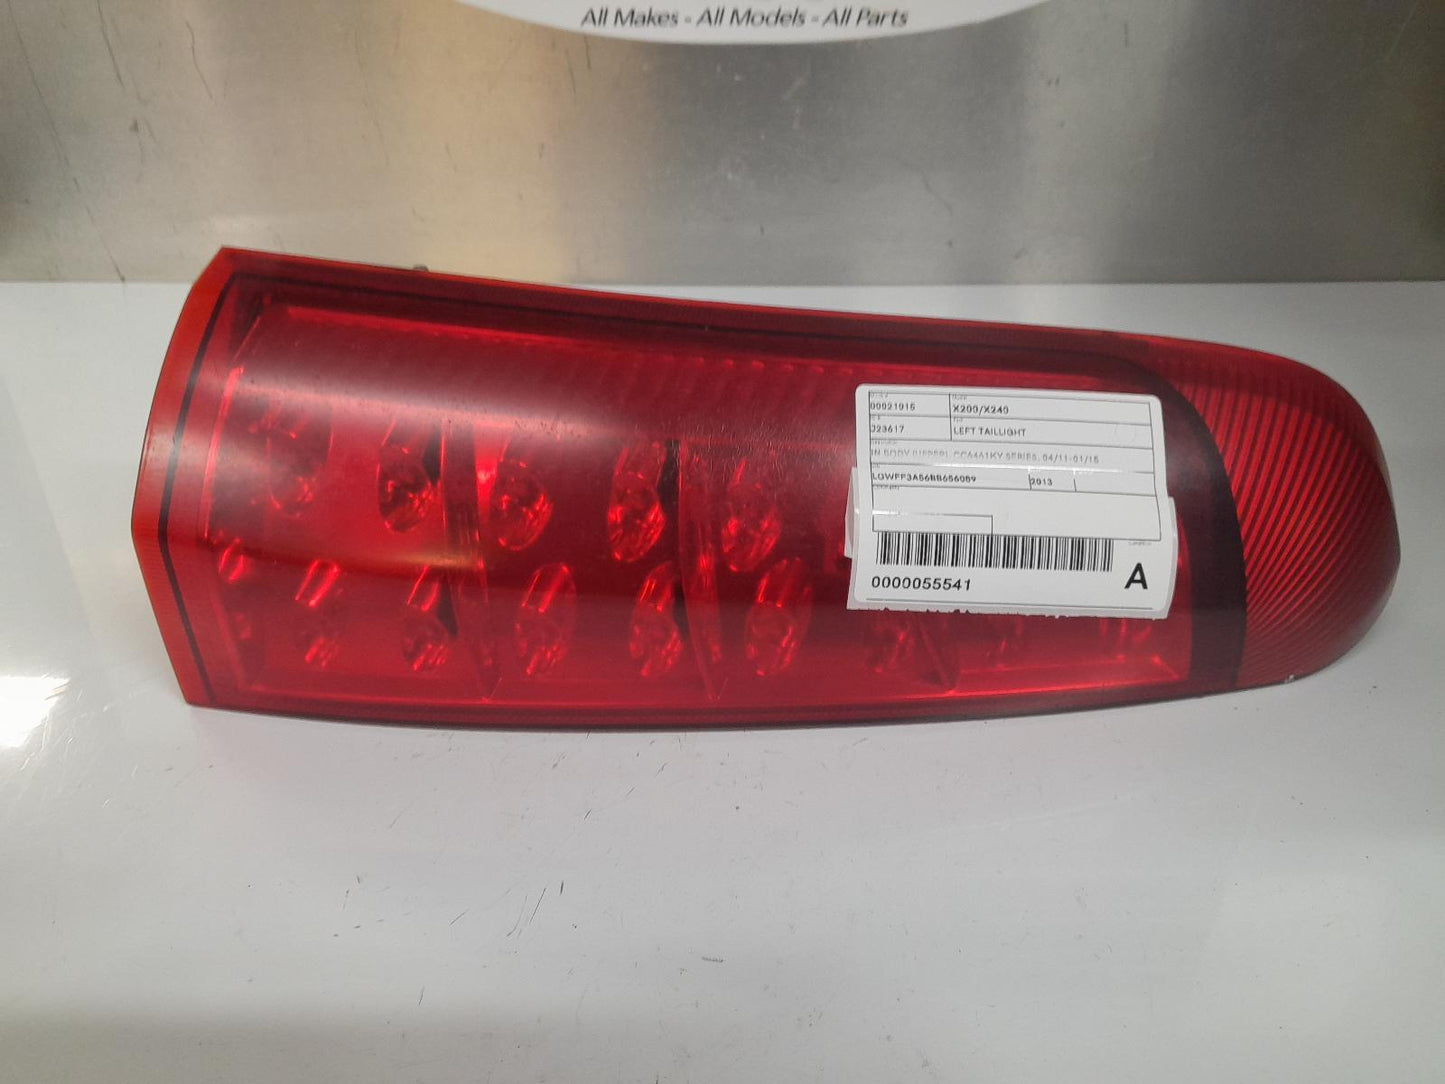 GREAT WALL X200/X240 LEFT TAILLIGHT IN BODY (UPPER), CC6461KY SERIES, 04/11-01/15